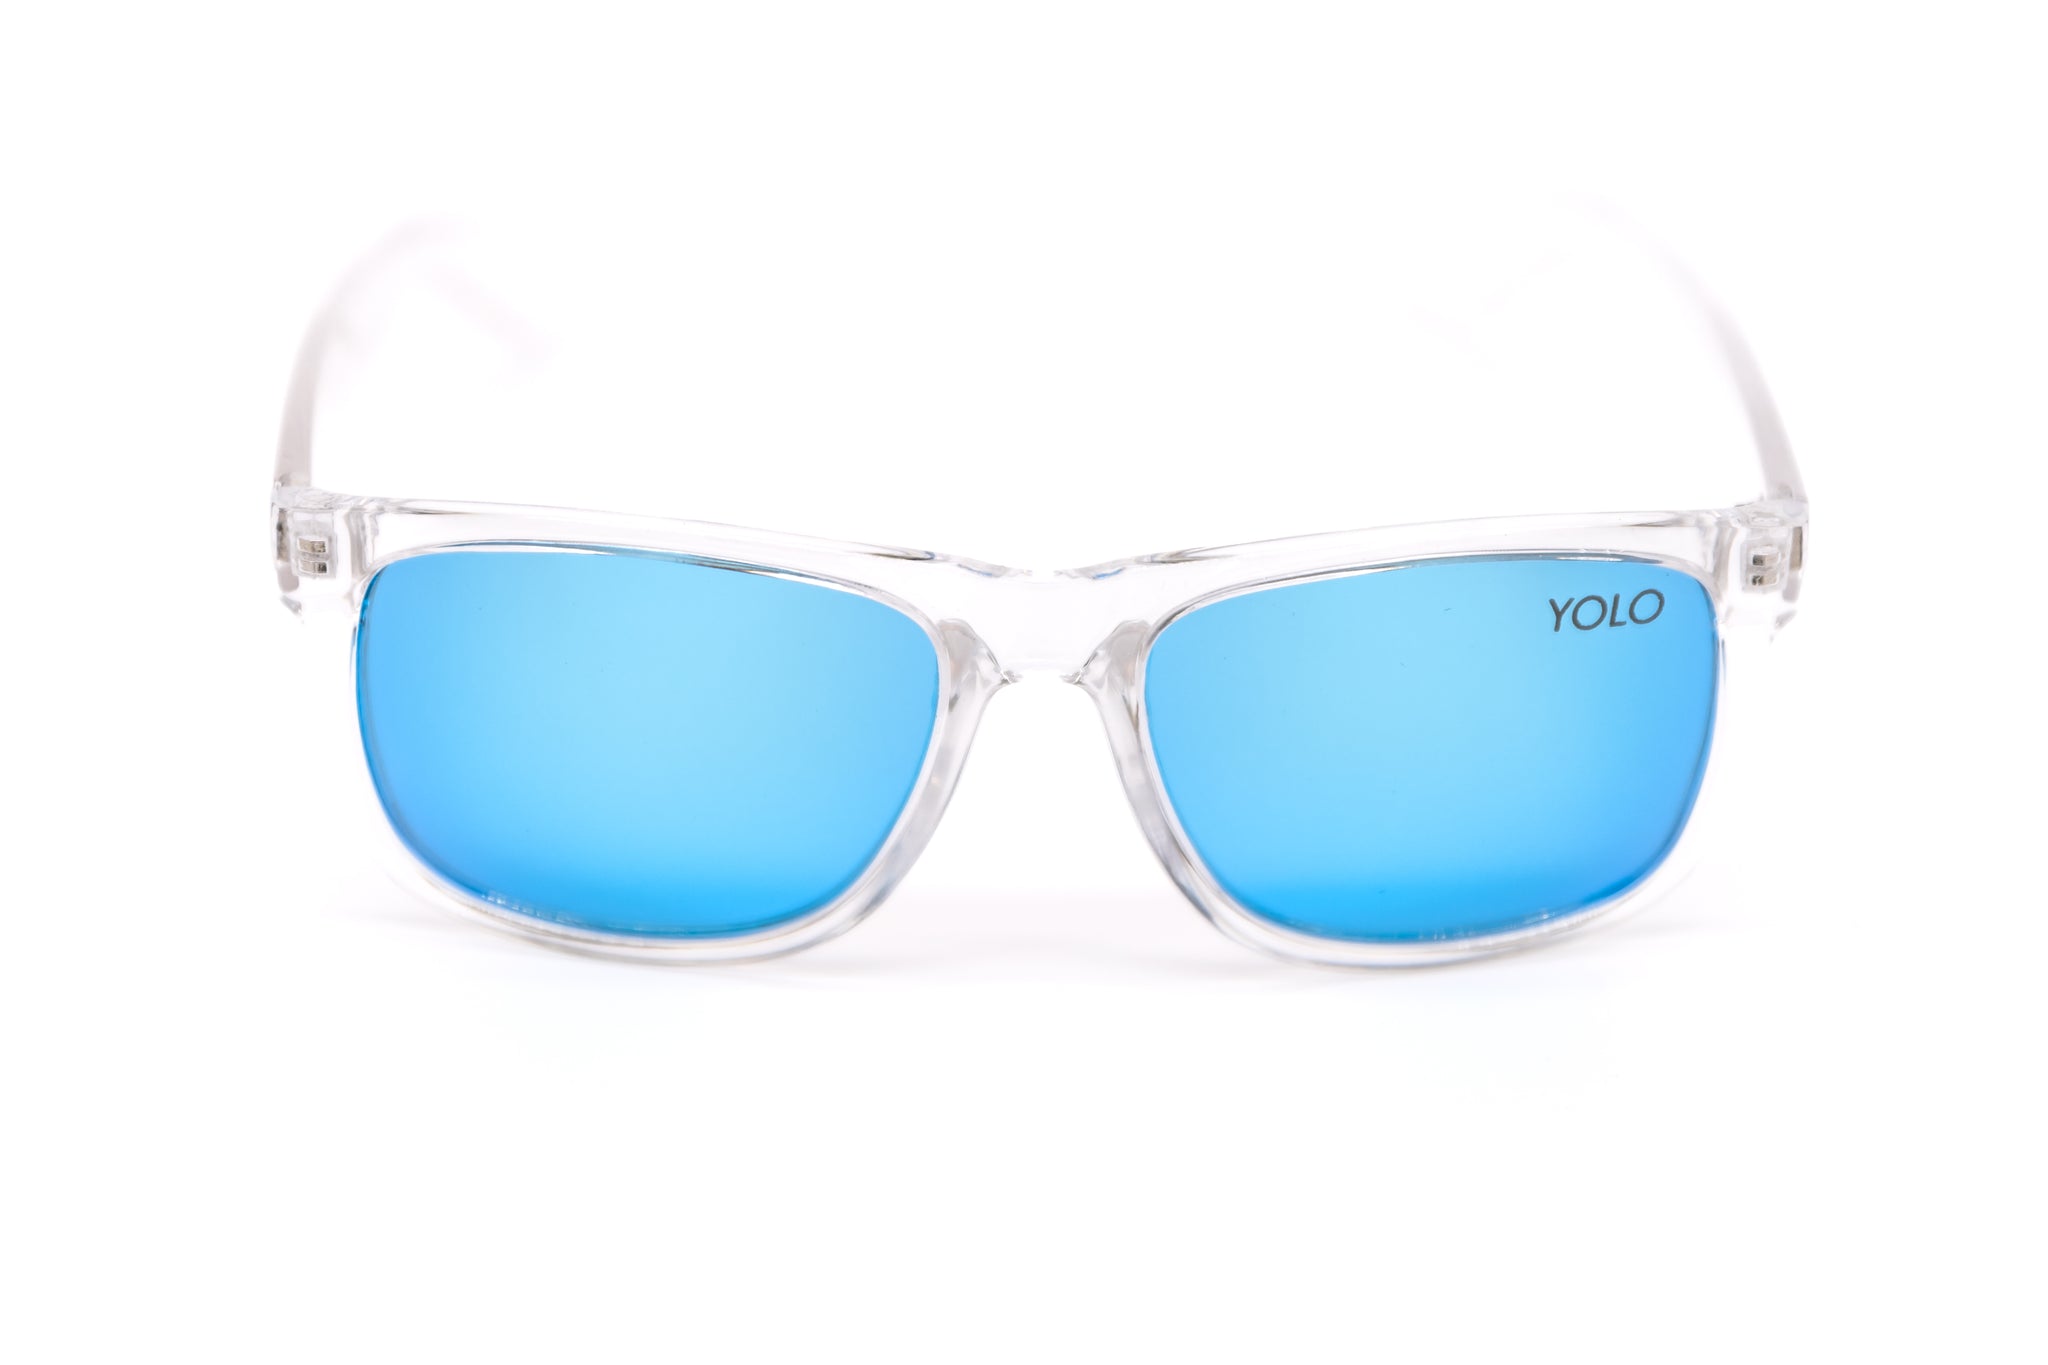 Polarized Sport Square Clear Framed Eyewear with Mirrored Yolo Lens – Sunglasses